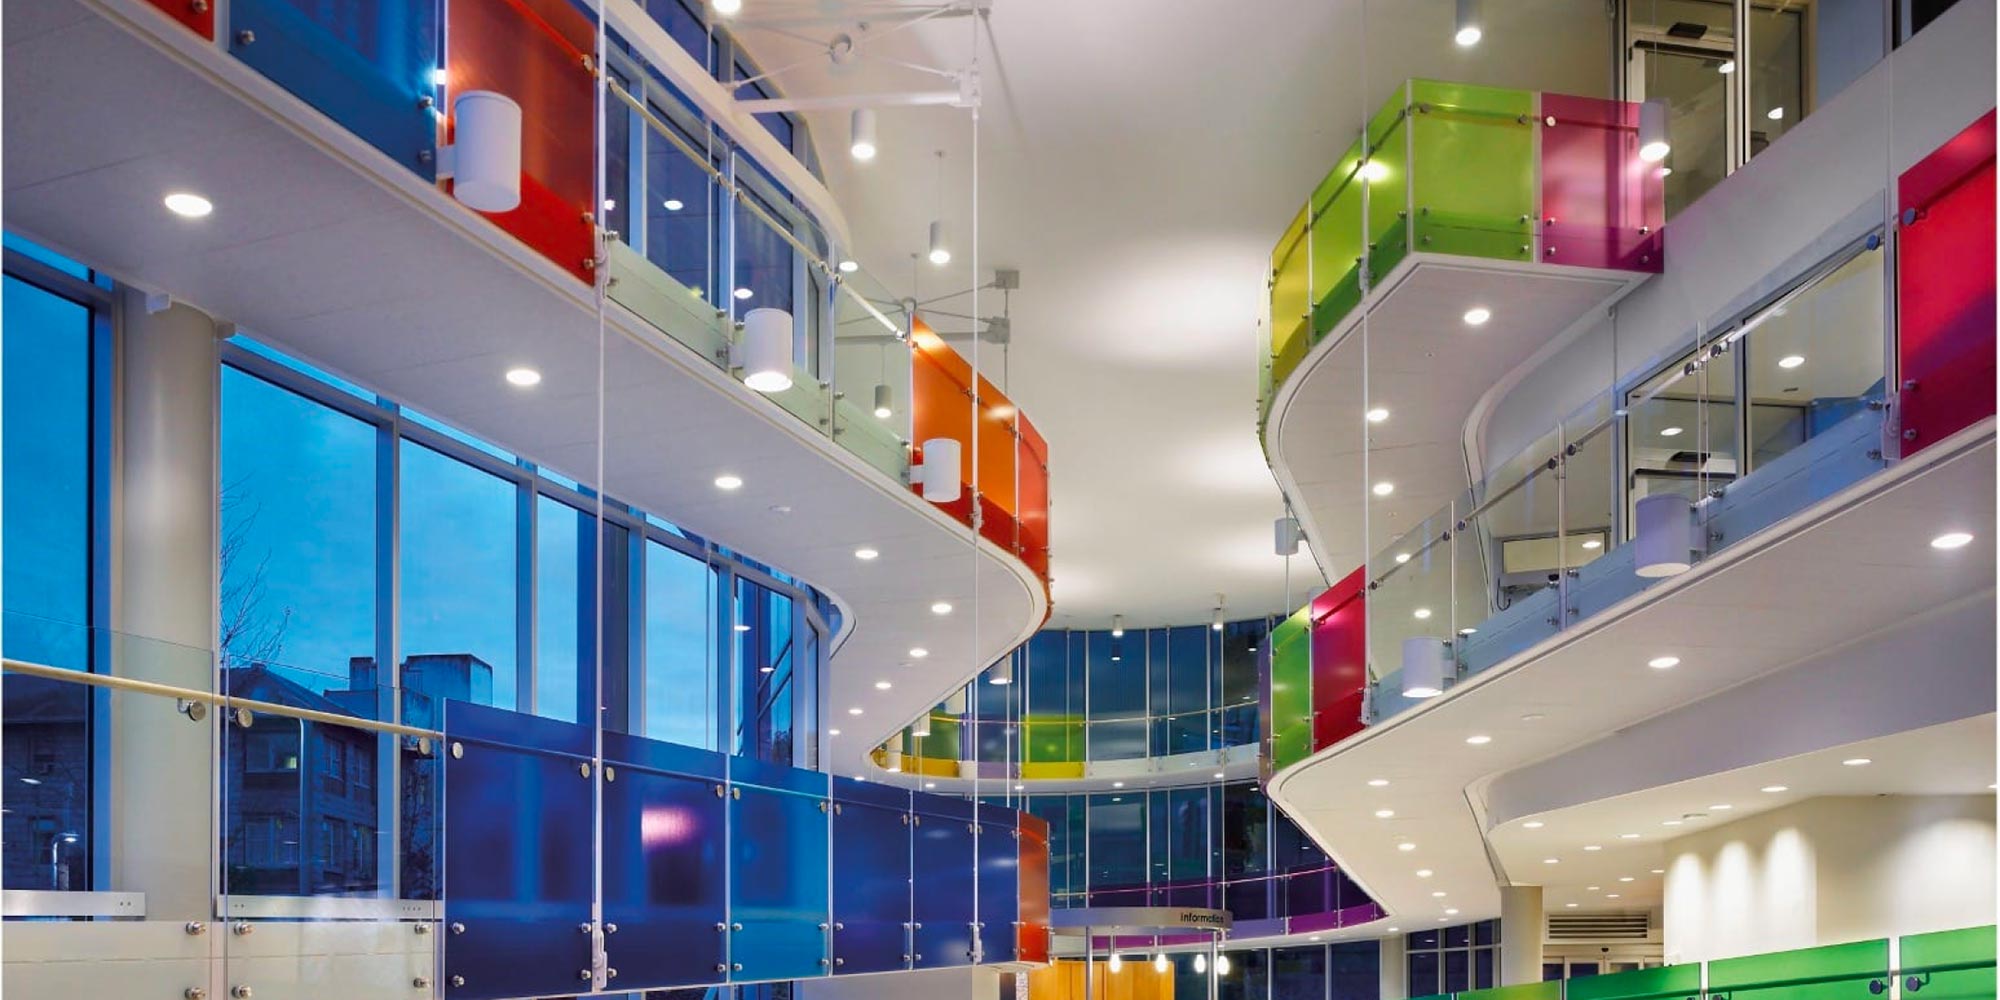 Medical-grade commercial lighting is essential for healthcare facilities. We selected four manufacturers and their products that assist in creating a welcoming, calm, and comfortable environment.